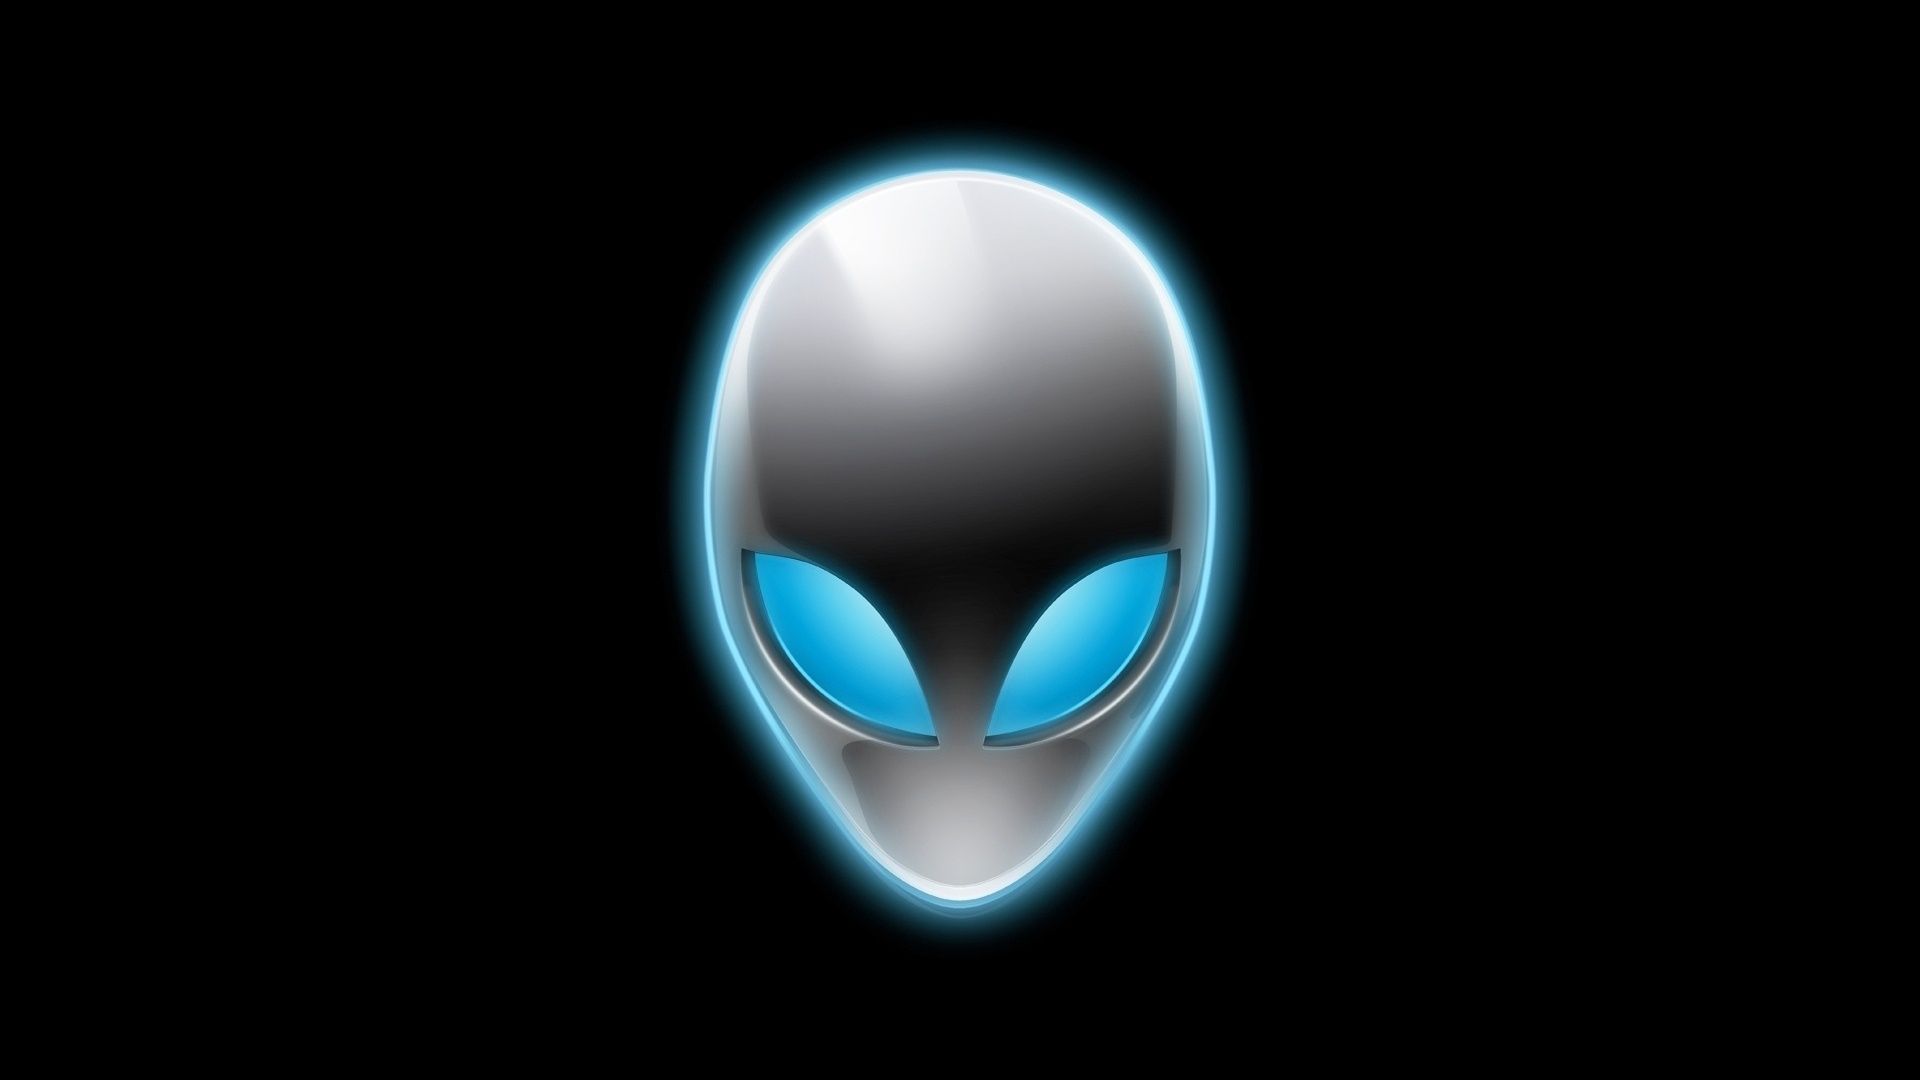 Check The Best Collection Of Hd Wallpapers Alien For Desktop, Laptop, Table 